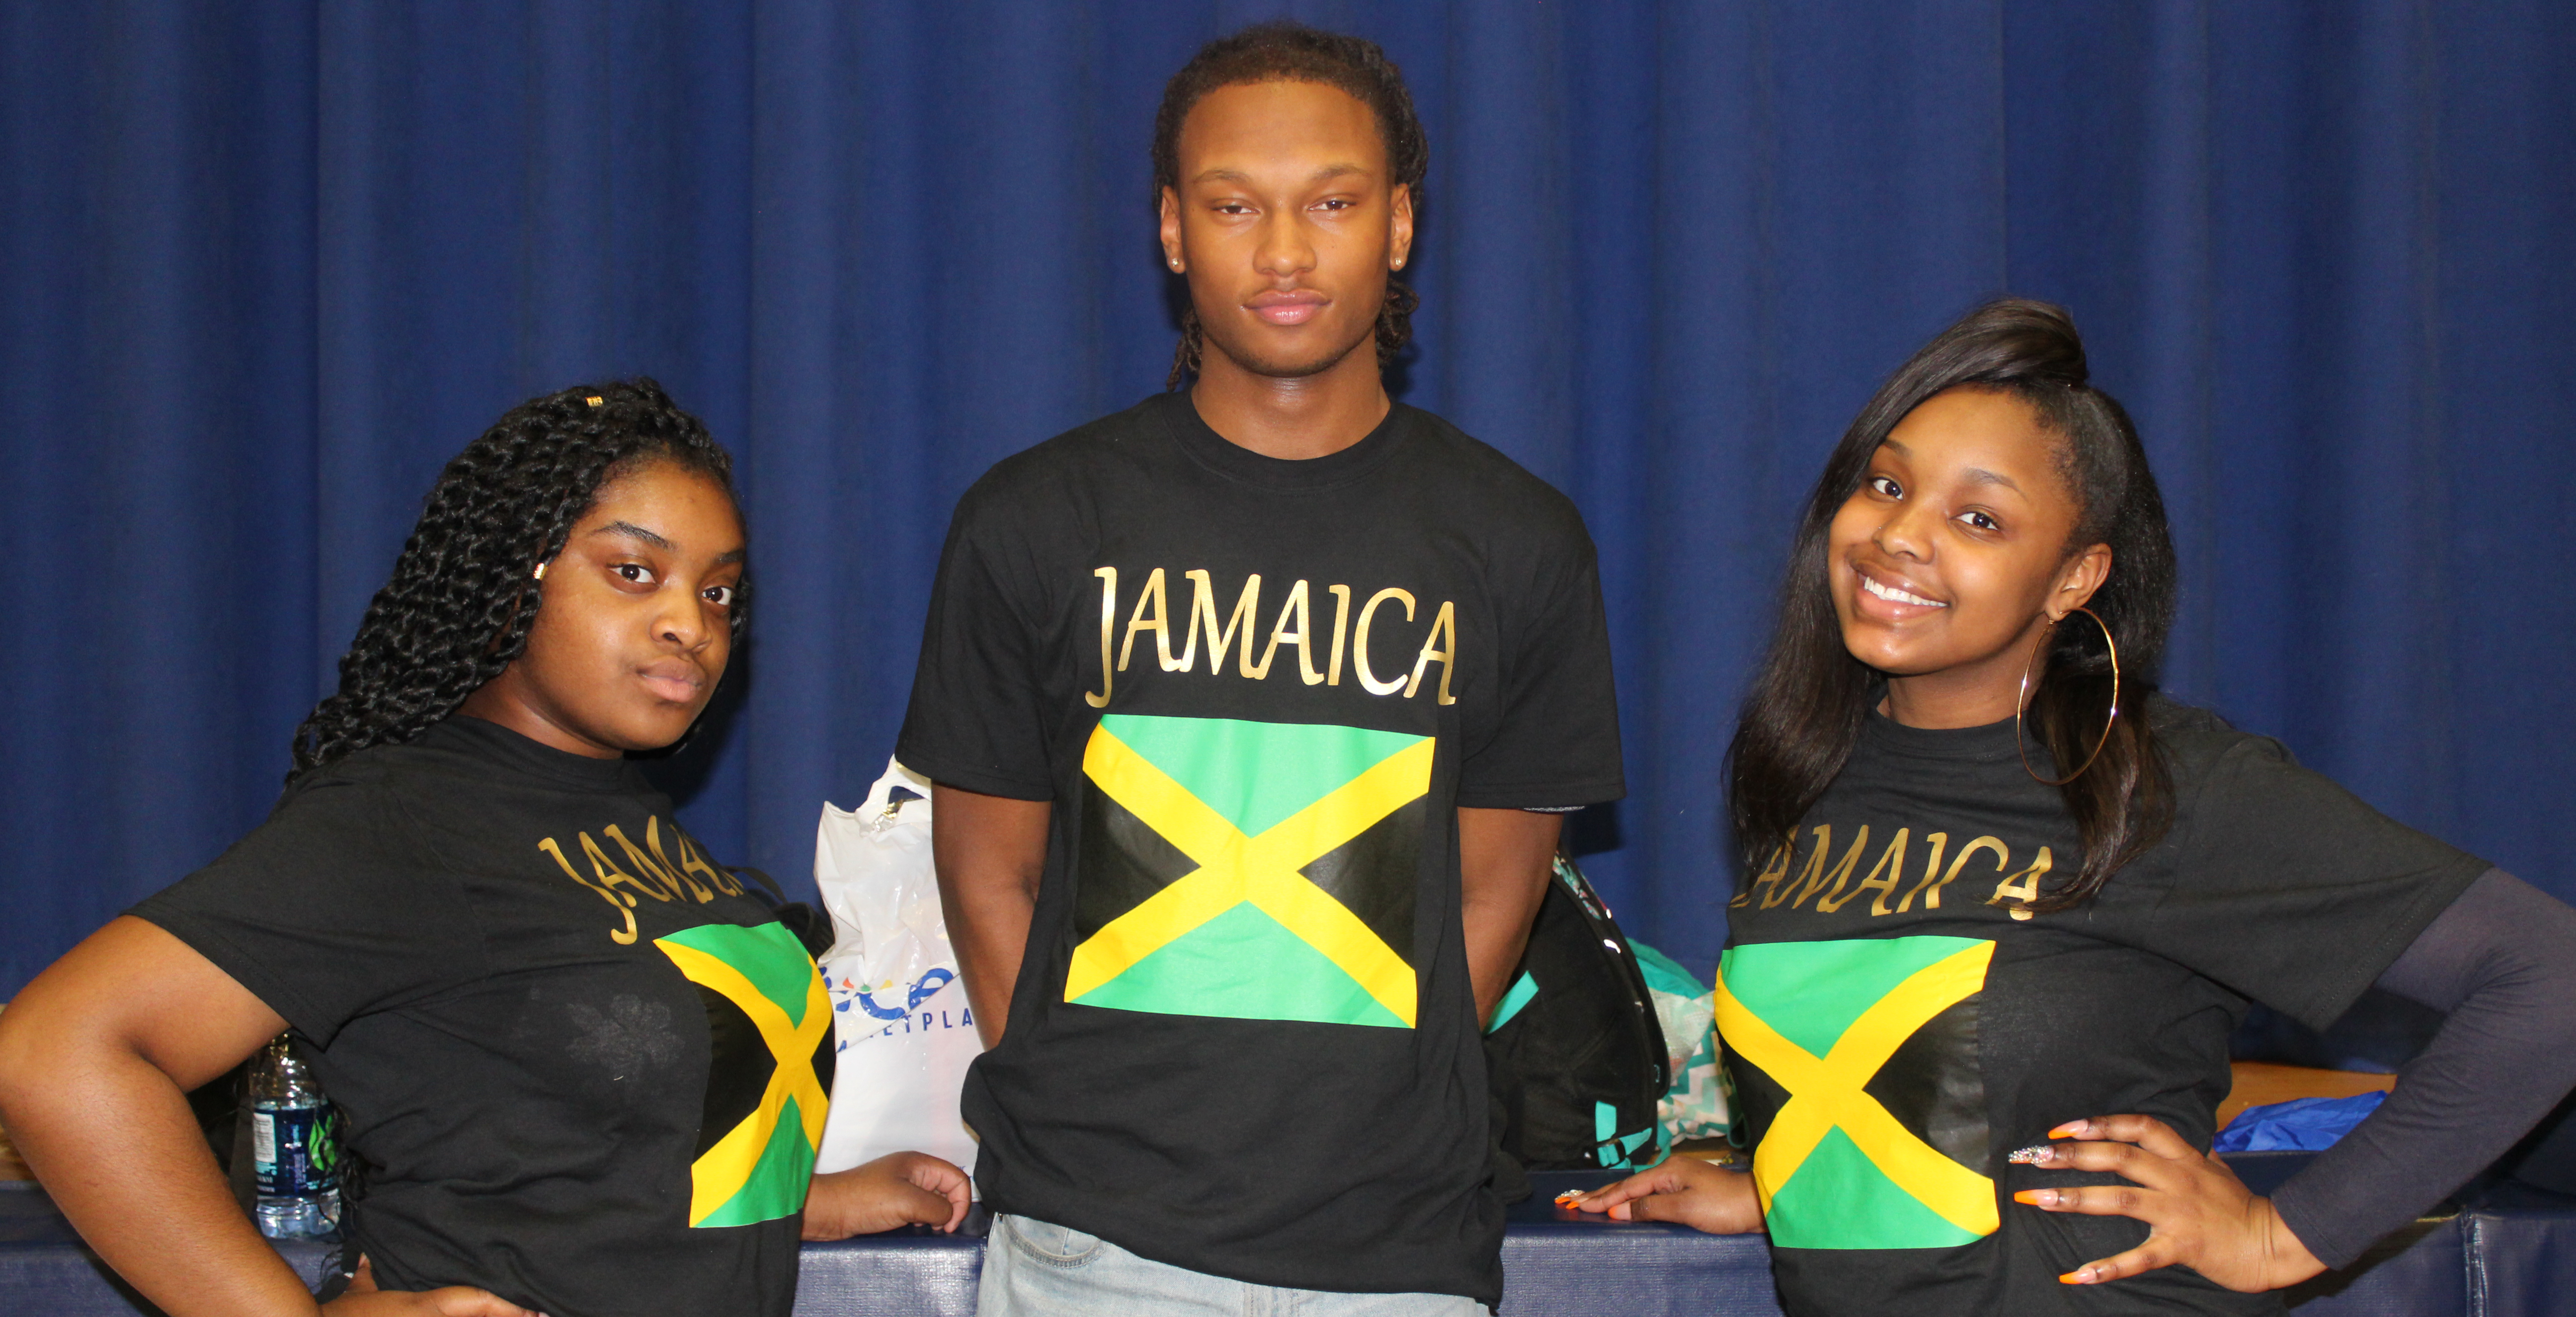 #SASCS Atoms represent the country of Jamaica during the third annual language and culture festival